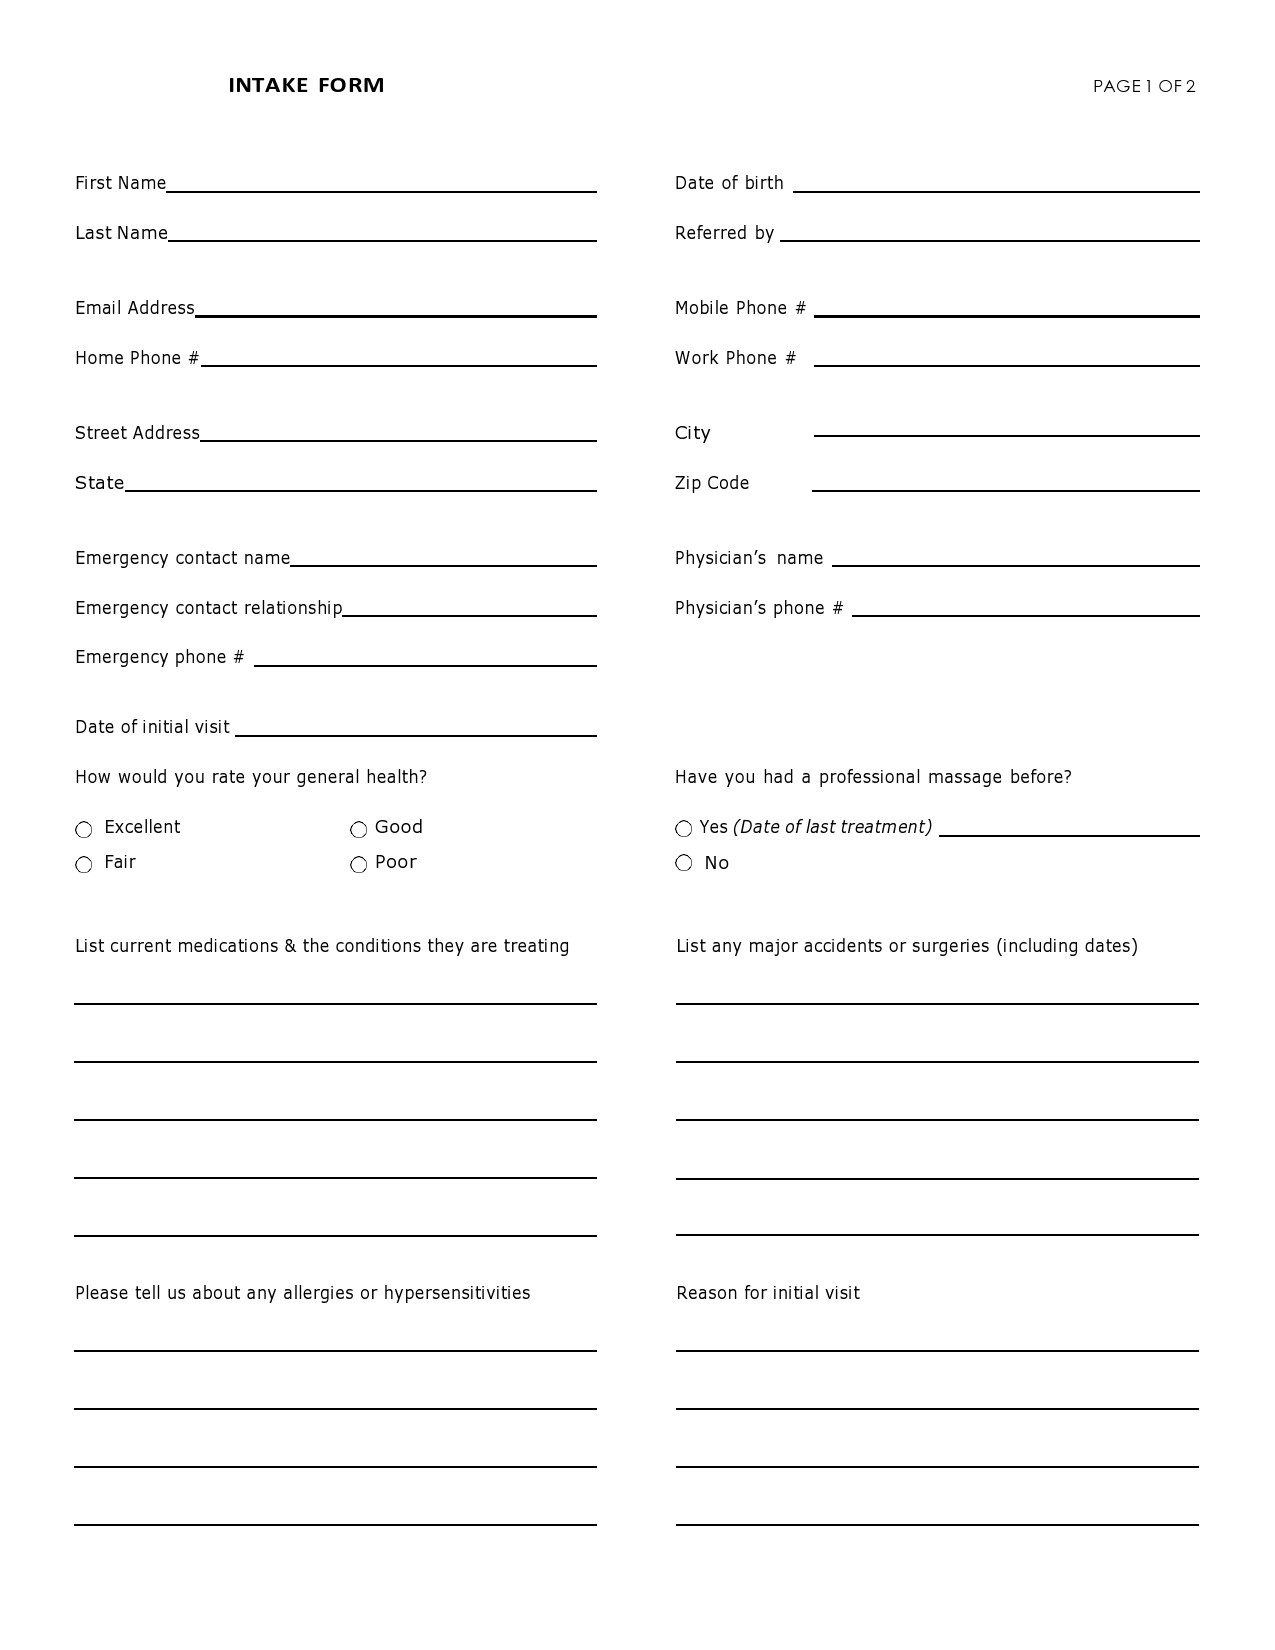 Free client intake form 03